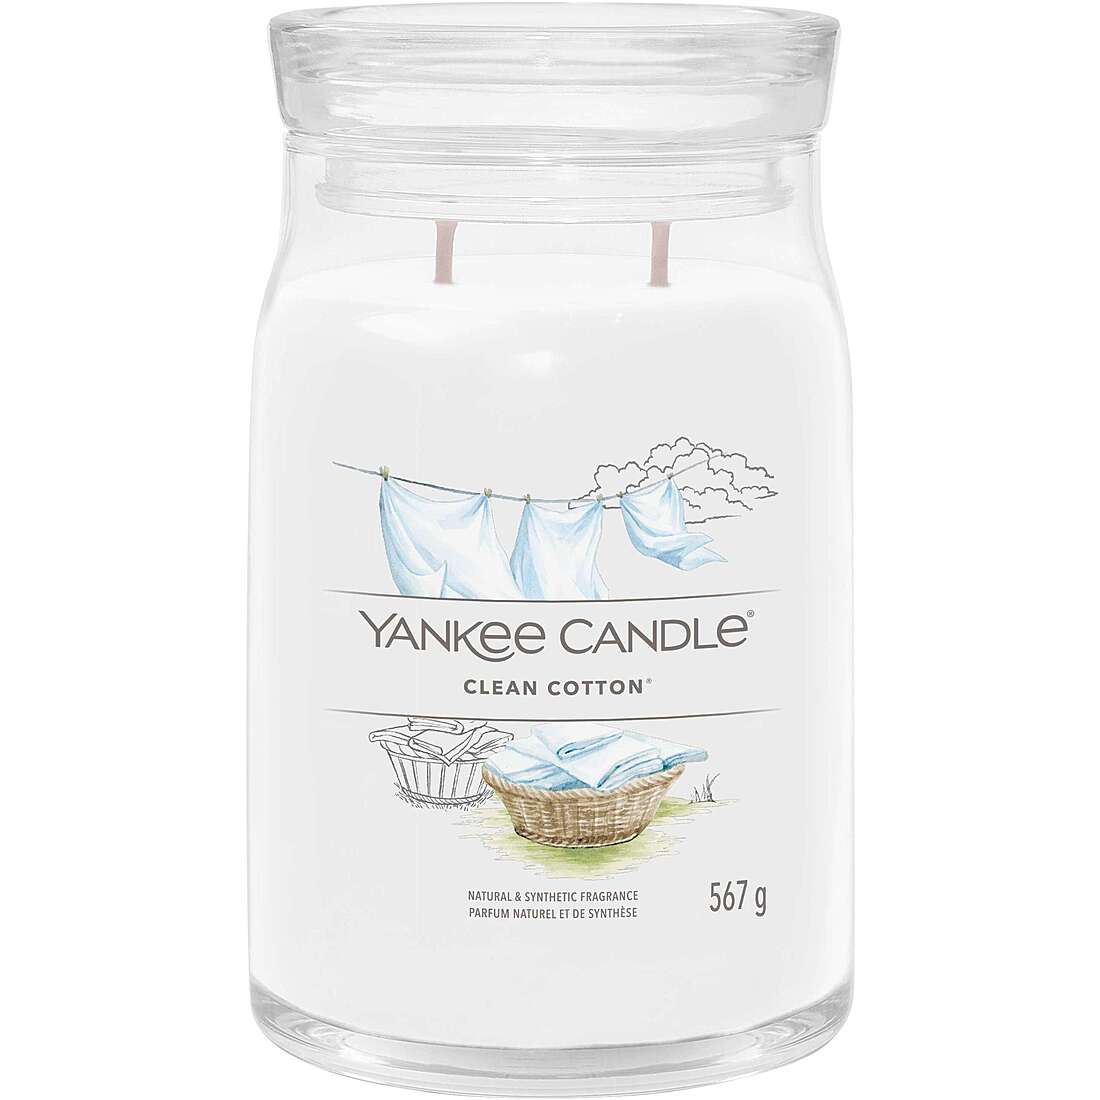 Yankee Candle Clean Cotton Signature Large Jar Candle